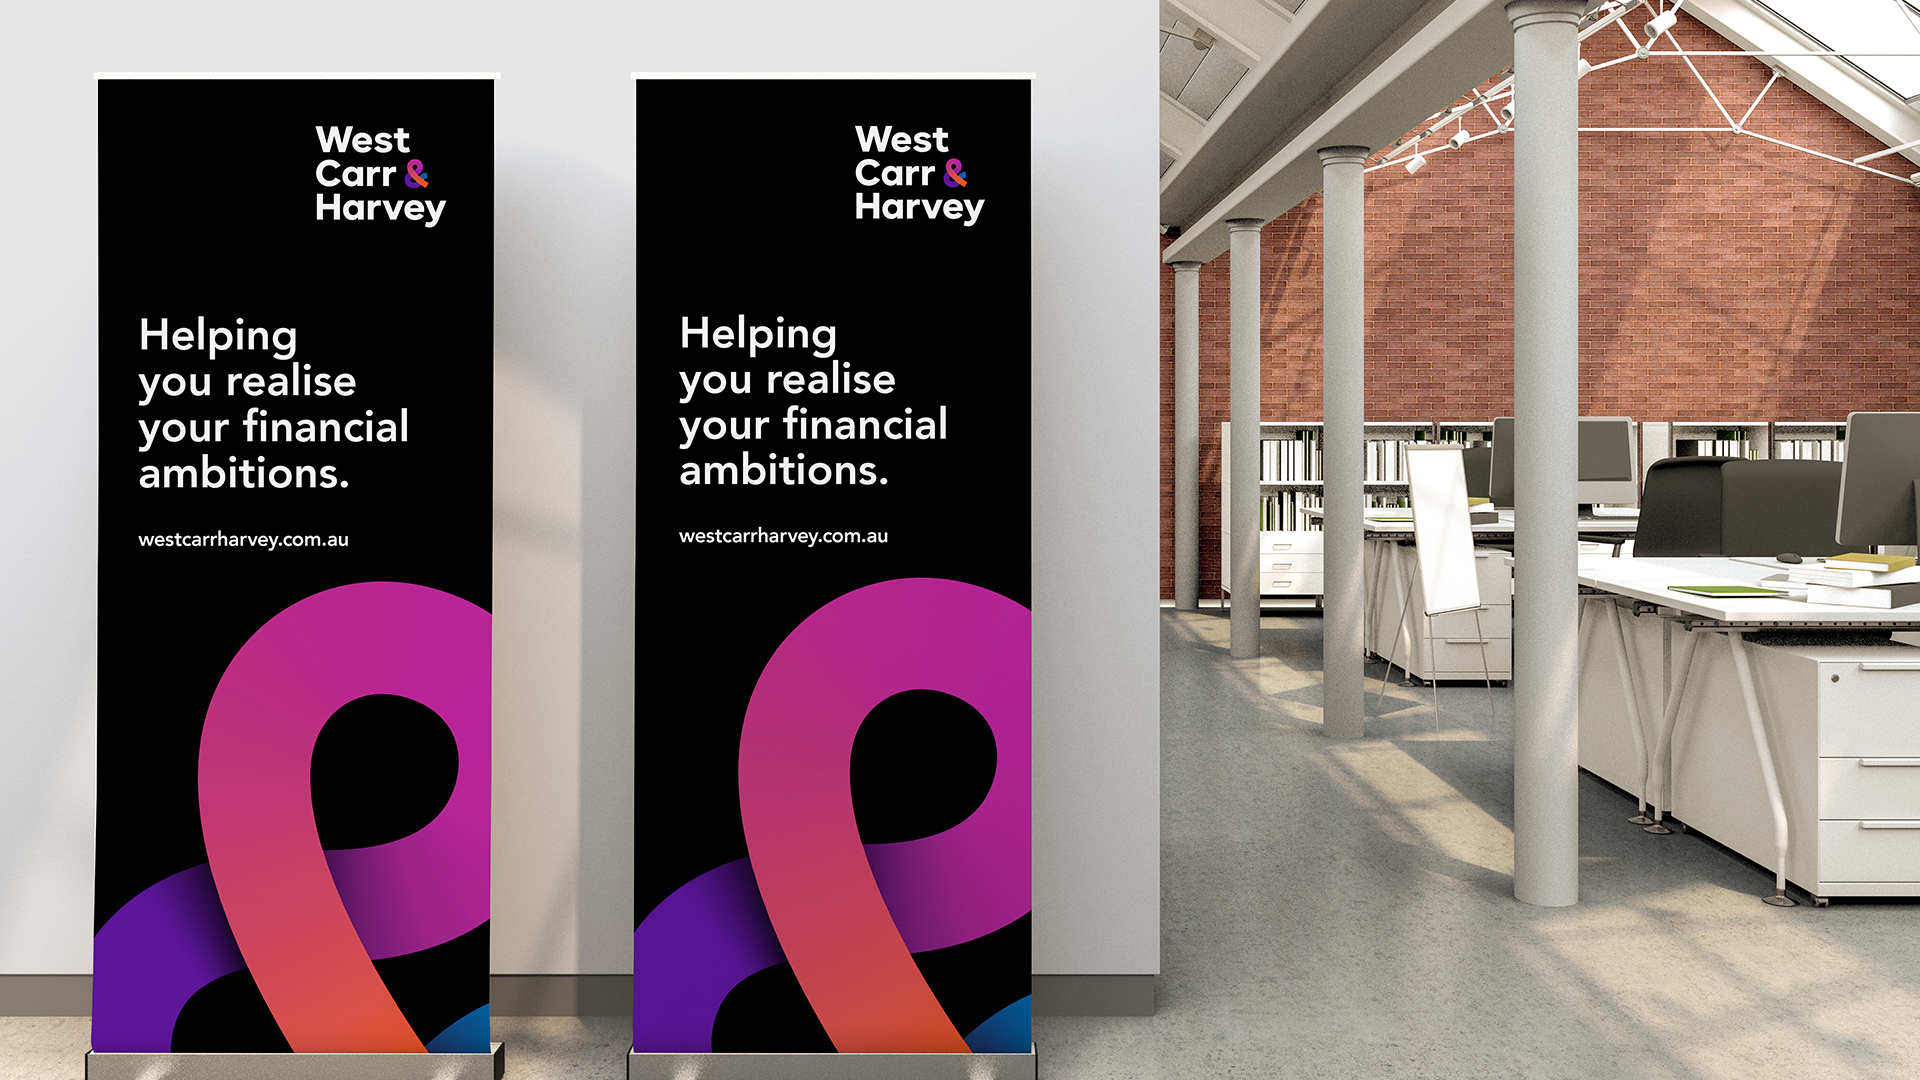 West Carr & Harvey branded pull up banners appearing in modern office environment